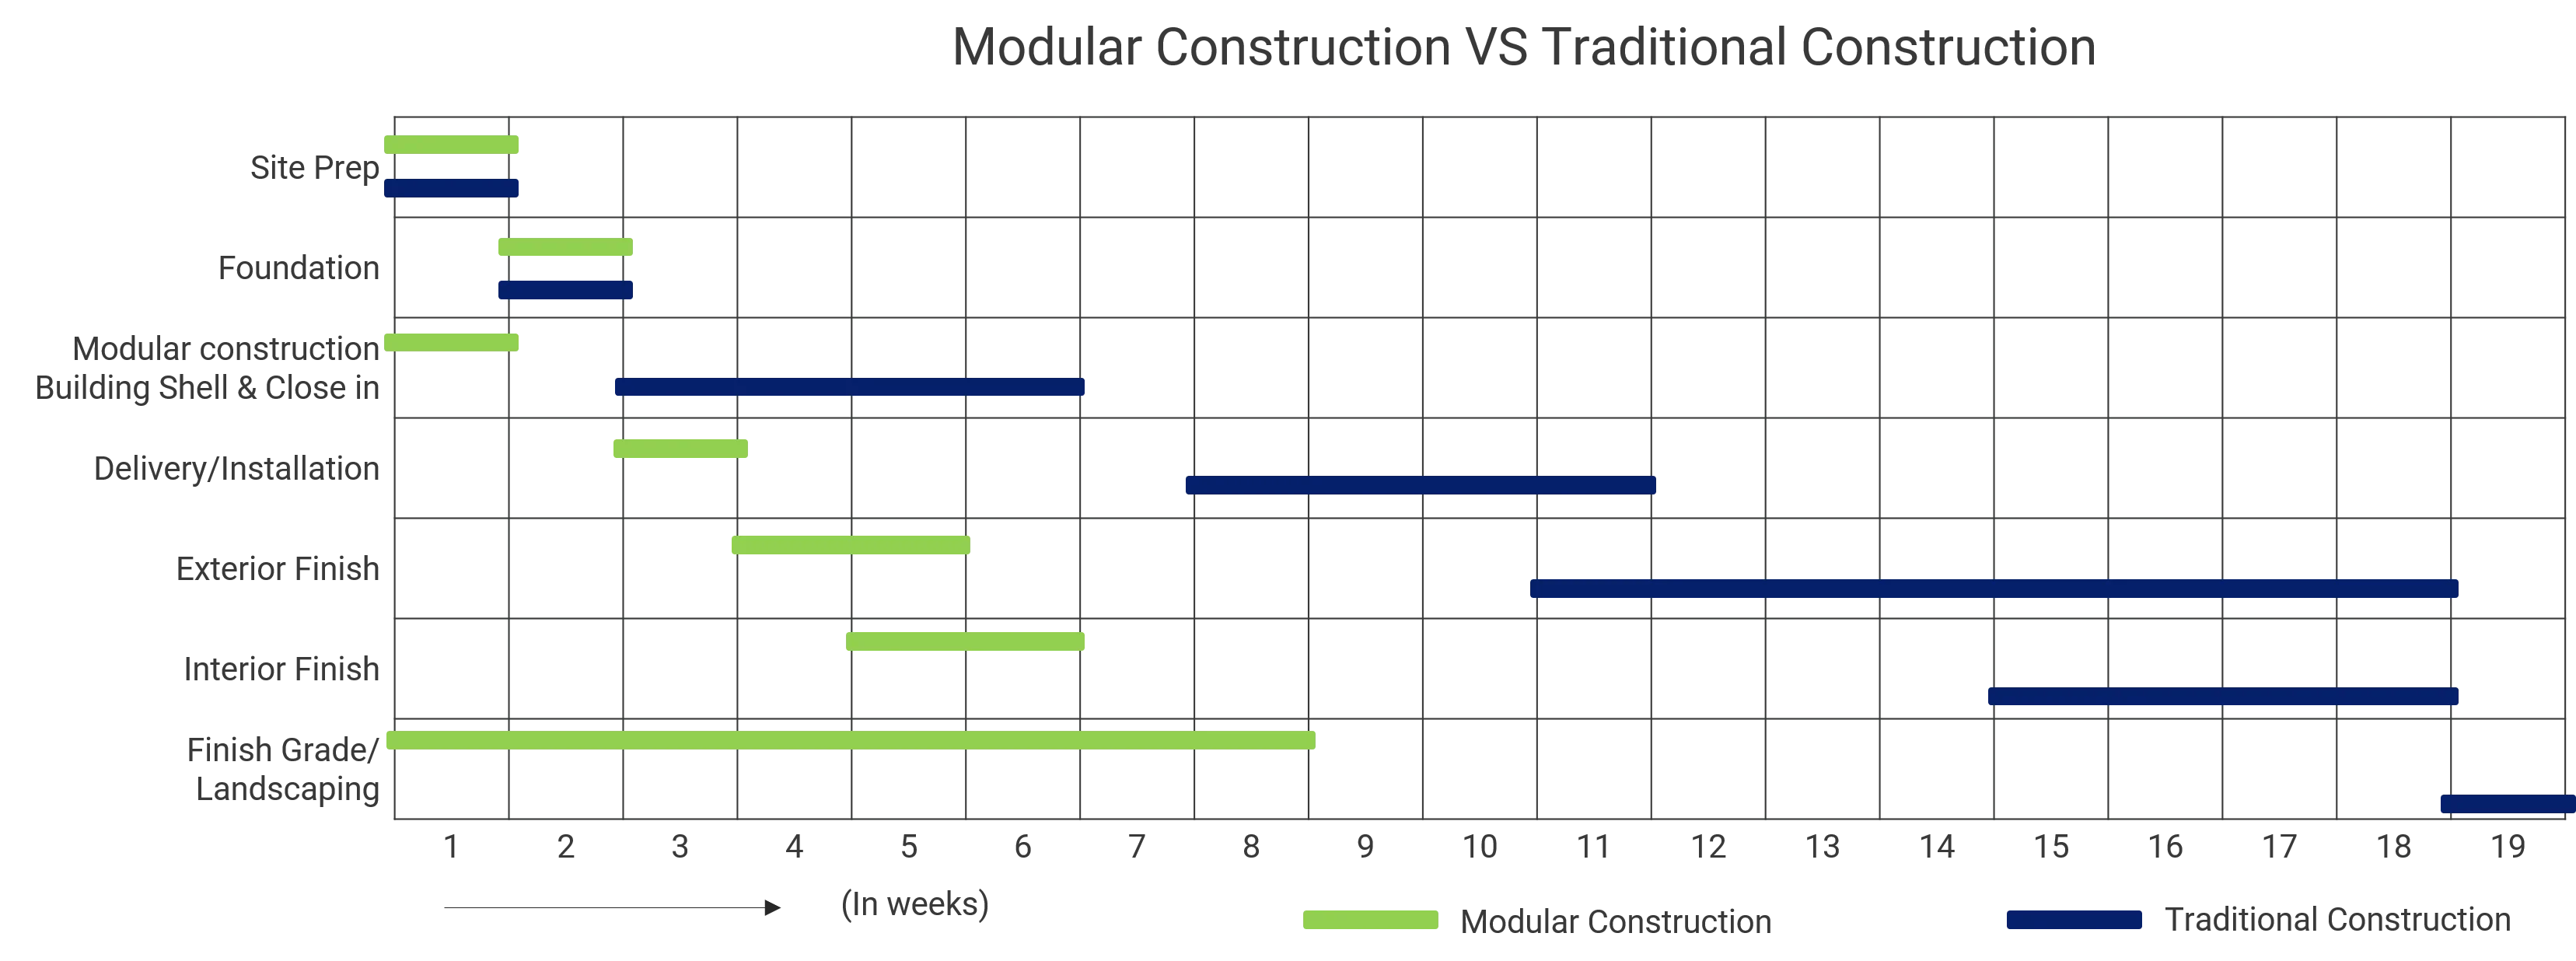 Modular vs Traditional construction - BlueQuark research & Consulting